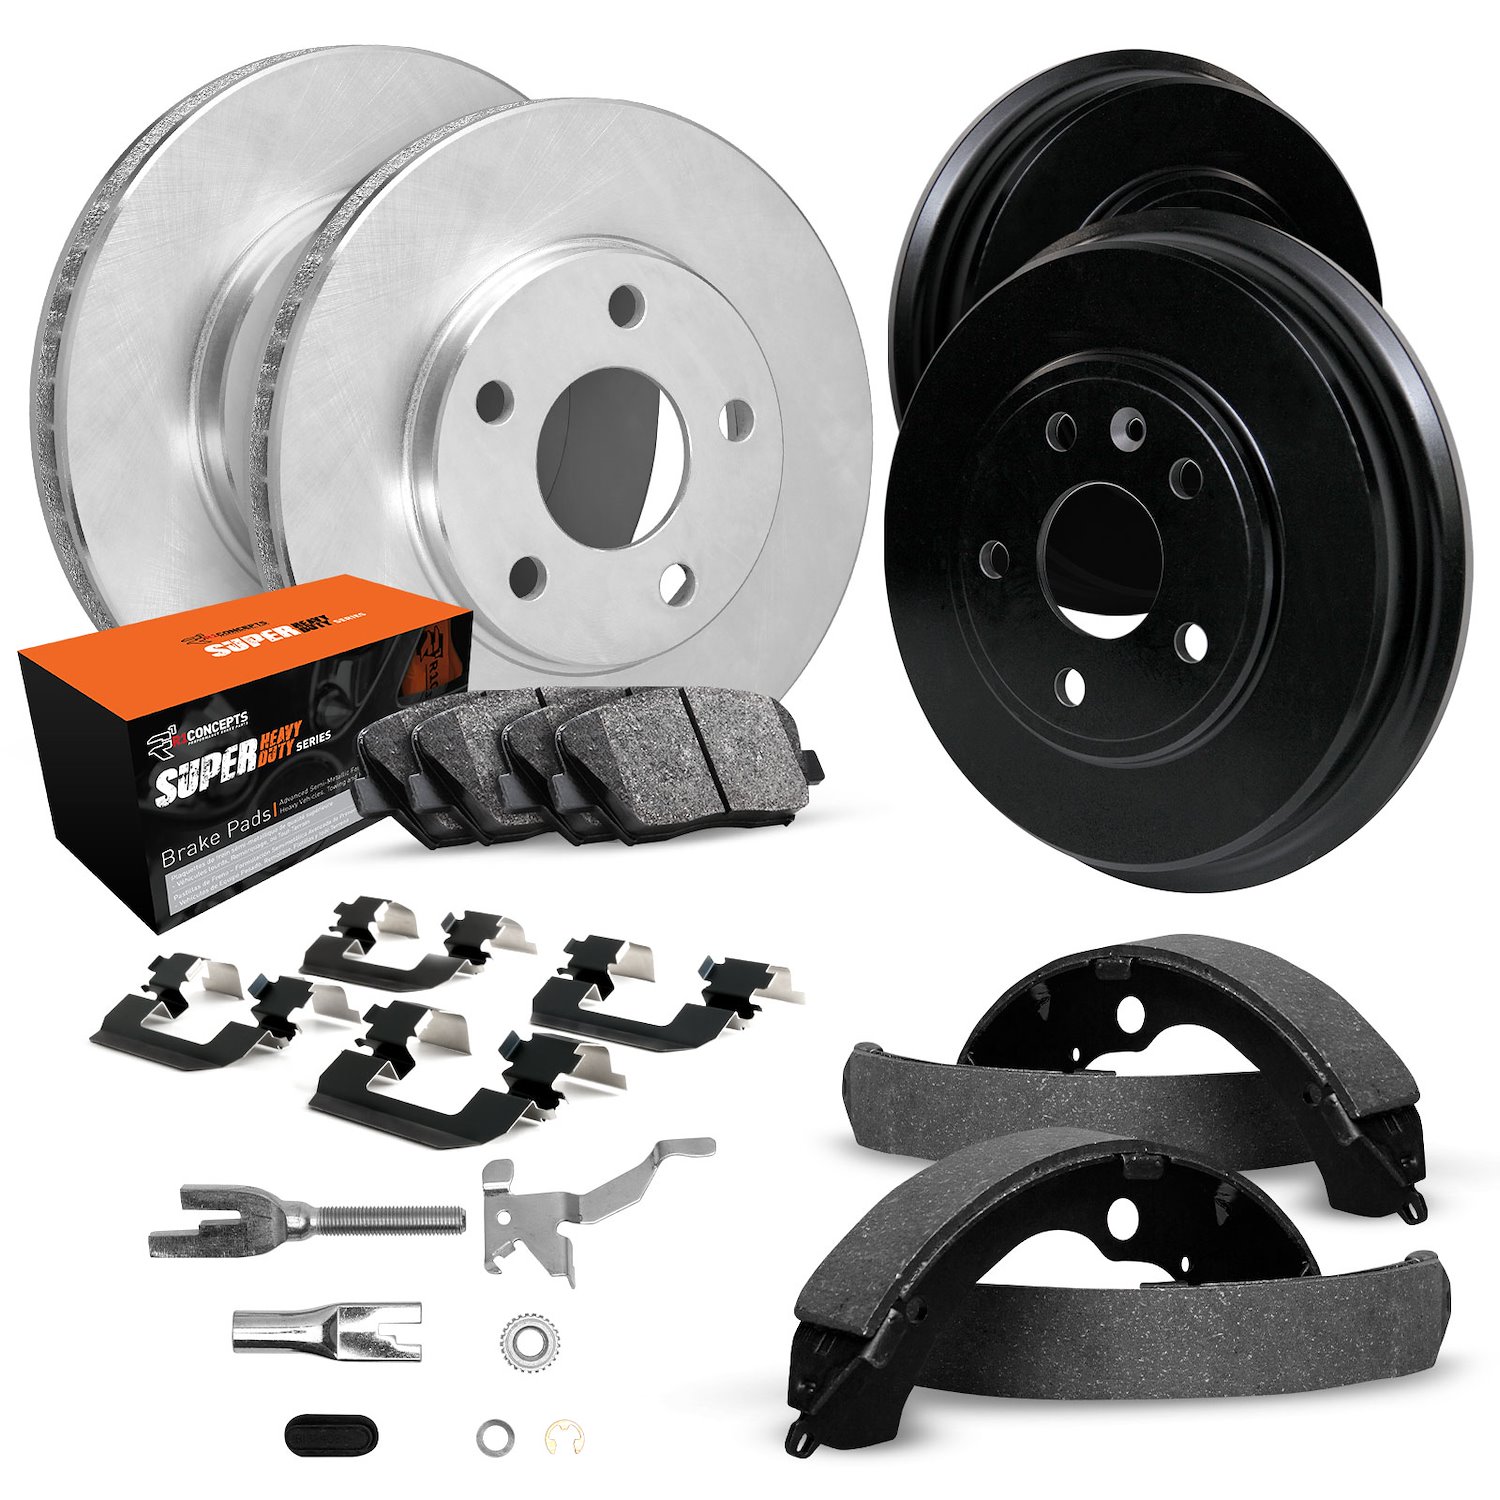 E-Line Blank Brake Rotor & Drum Set w/Super-Duty Pads, Shoes, Hardware, & Adjusters, 1983-1991 Ford/Lincoln/Mercury/Mazda